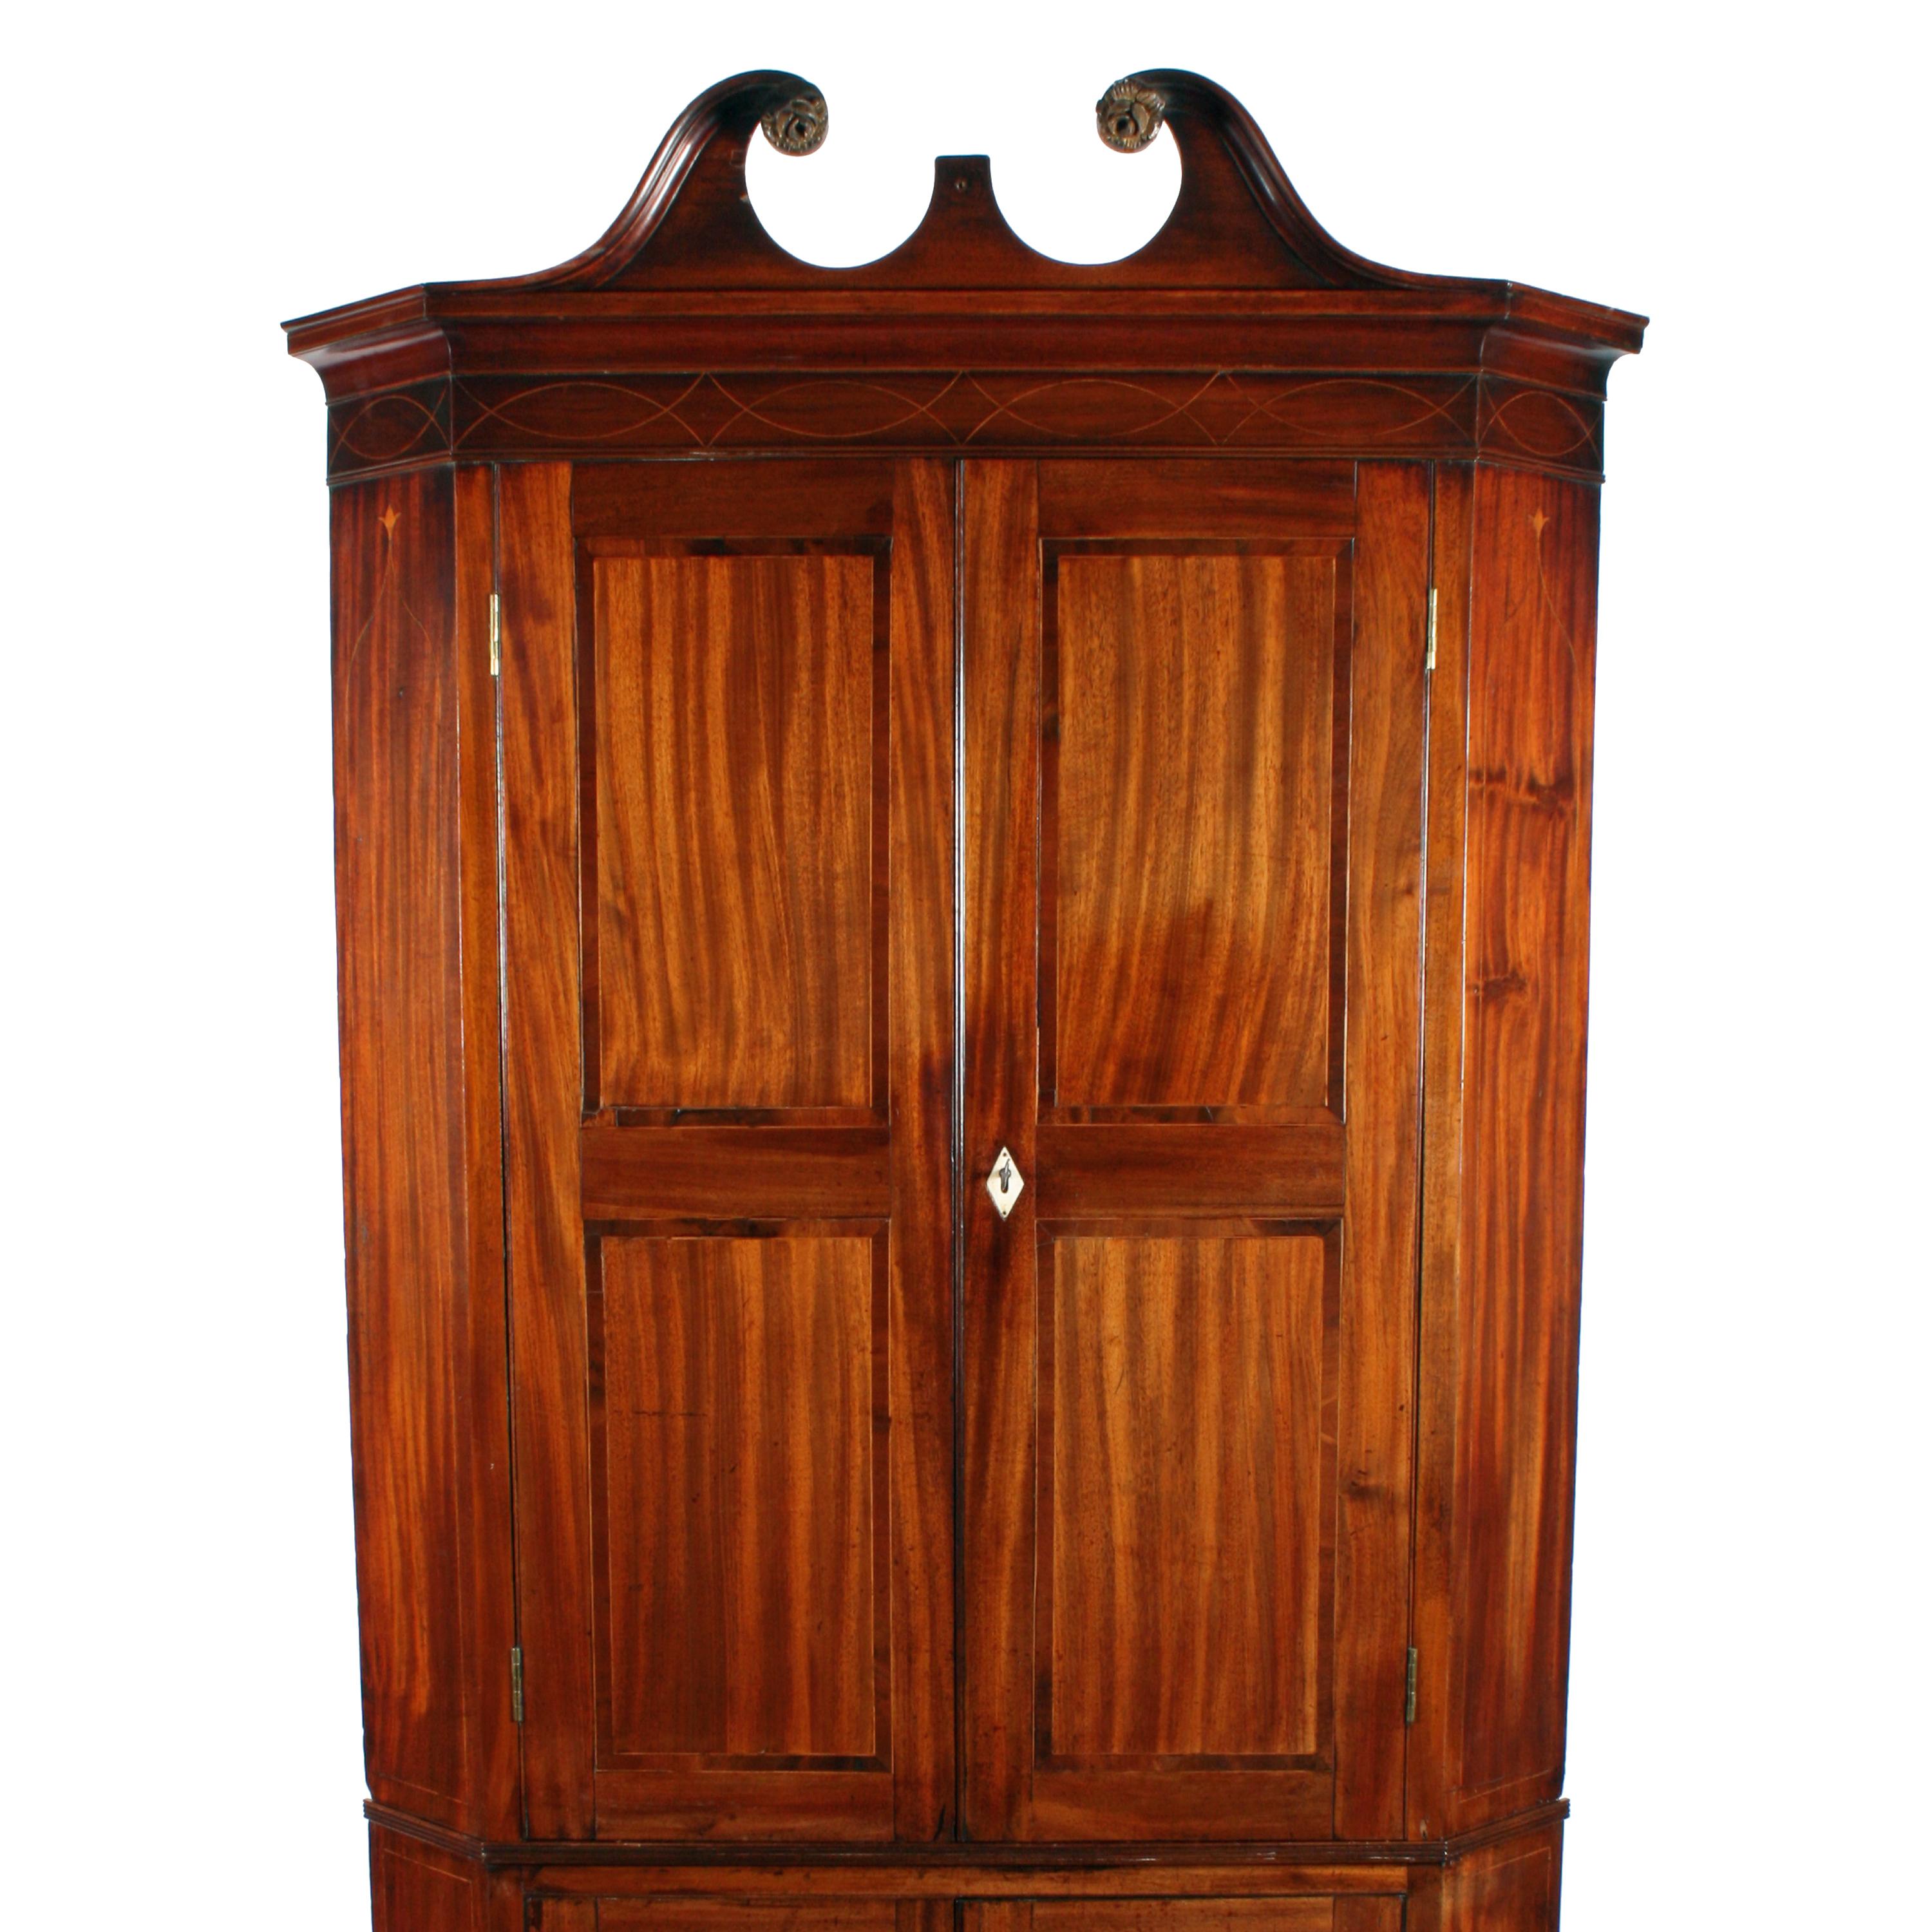 A late 18th to early 19th century Georgian mahogany double corner cupboard.

The cupboard has four doors that have figured mahogany crossbanded and box wood edged panels, four in the top and two in the base.

The interior has shaped fixed